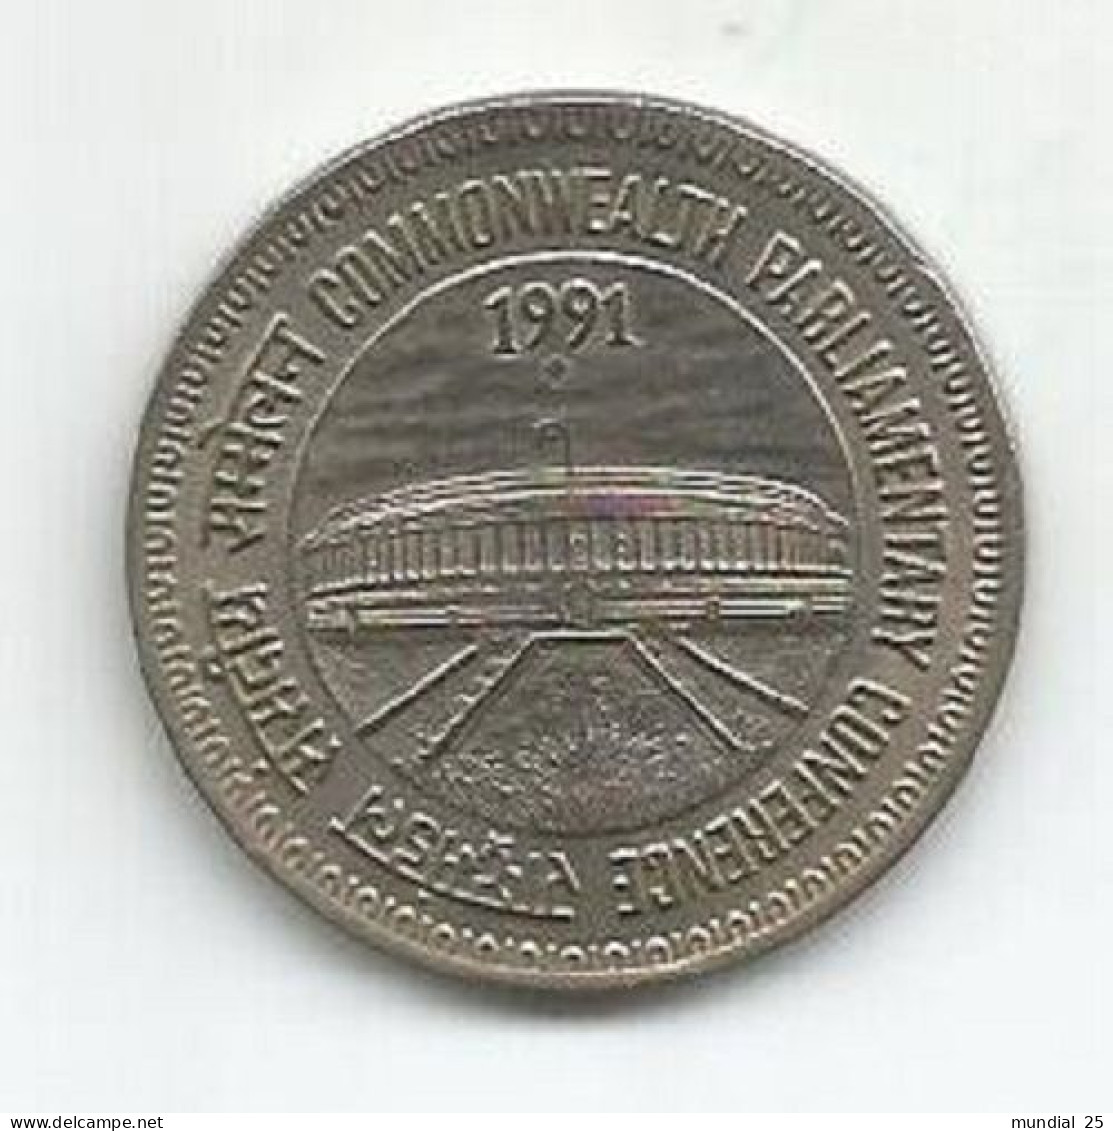 INDIA 1 RUPEE 1991 - COMMONWEALTH PARLIAMENTARY CONFERENCE - Indien